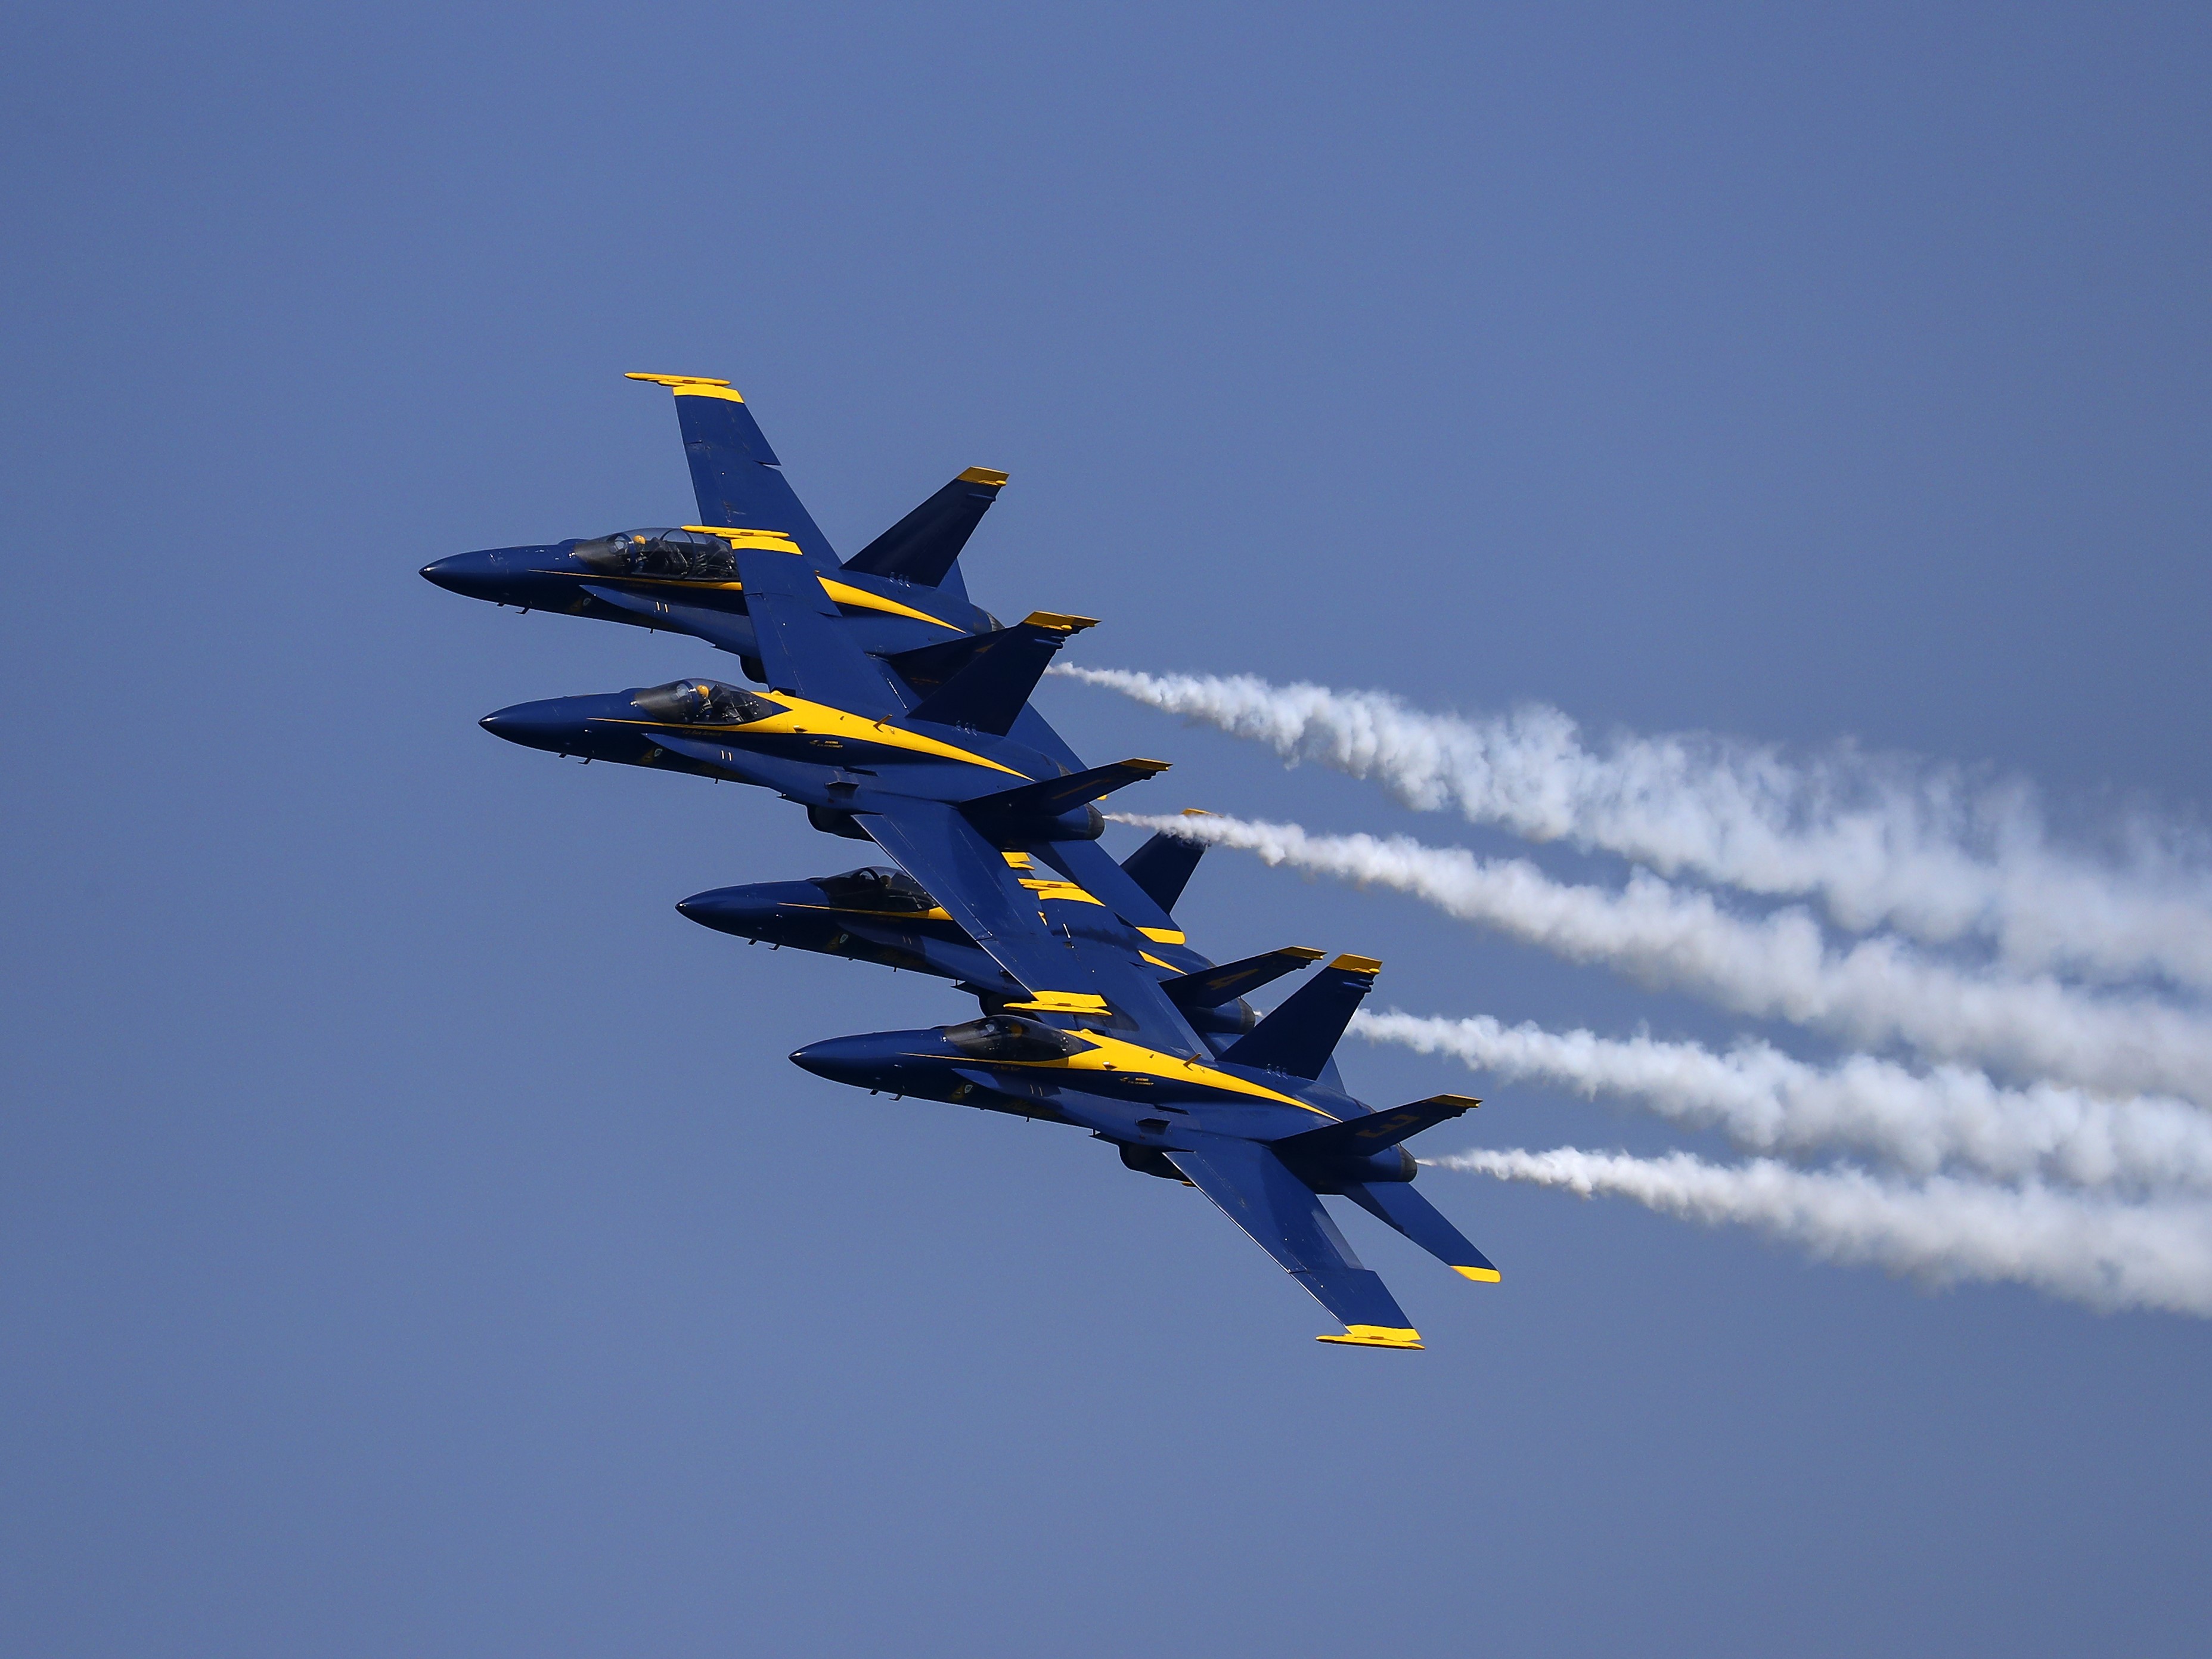 Blue Angels Plane Flyby Surprises People at Beach in Video | Time